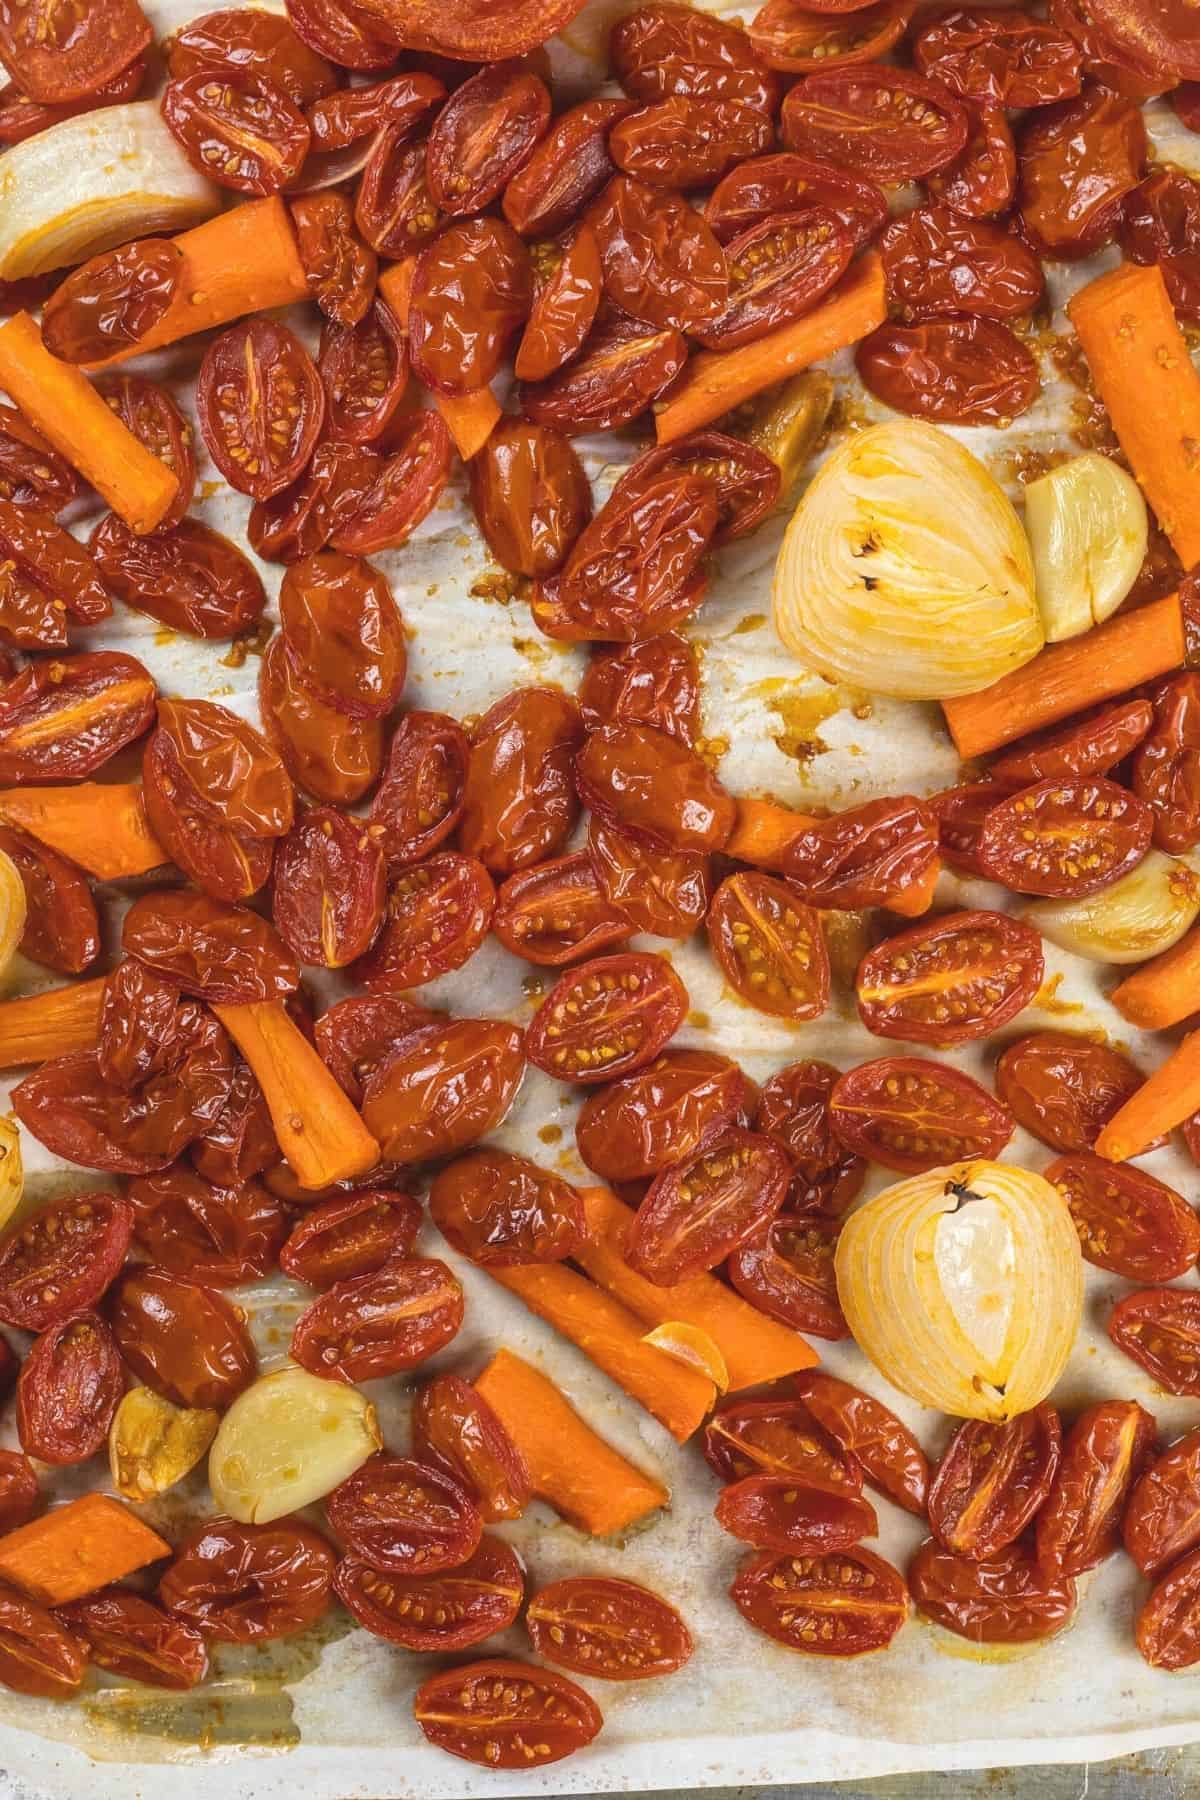 Roasted vegetables like tomatoes, onions, garlic, and carrots on a silver baking tray with parchment paper.